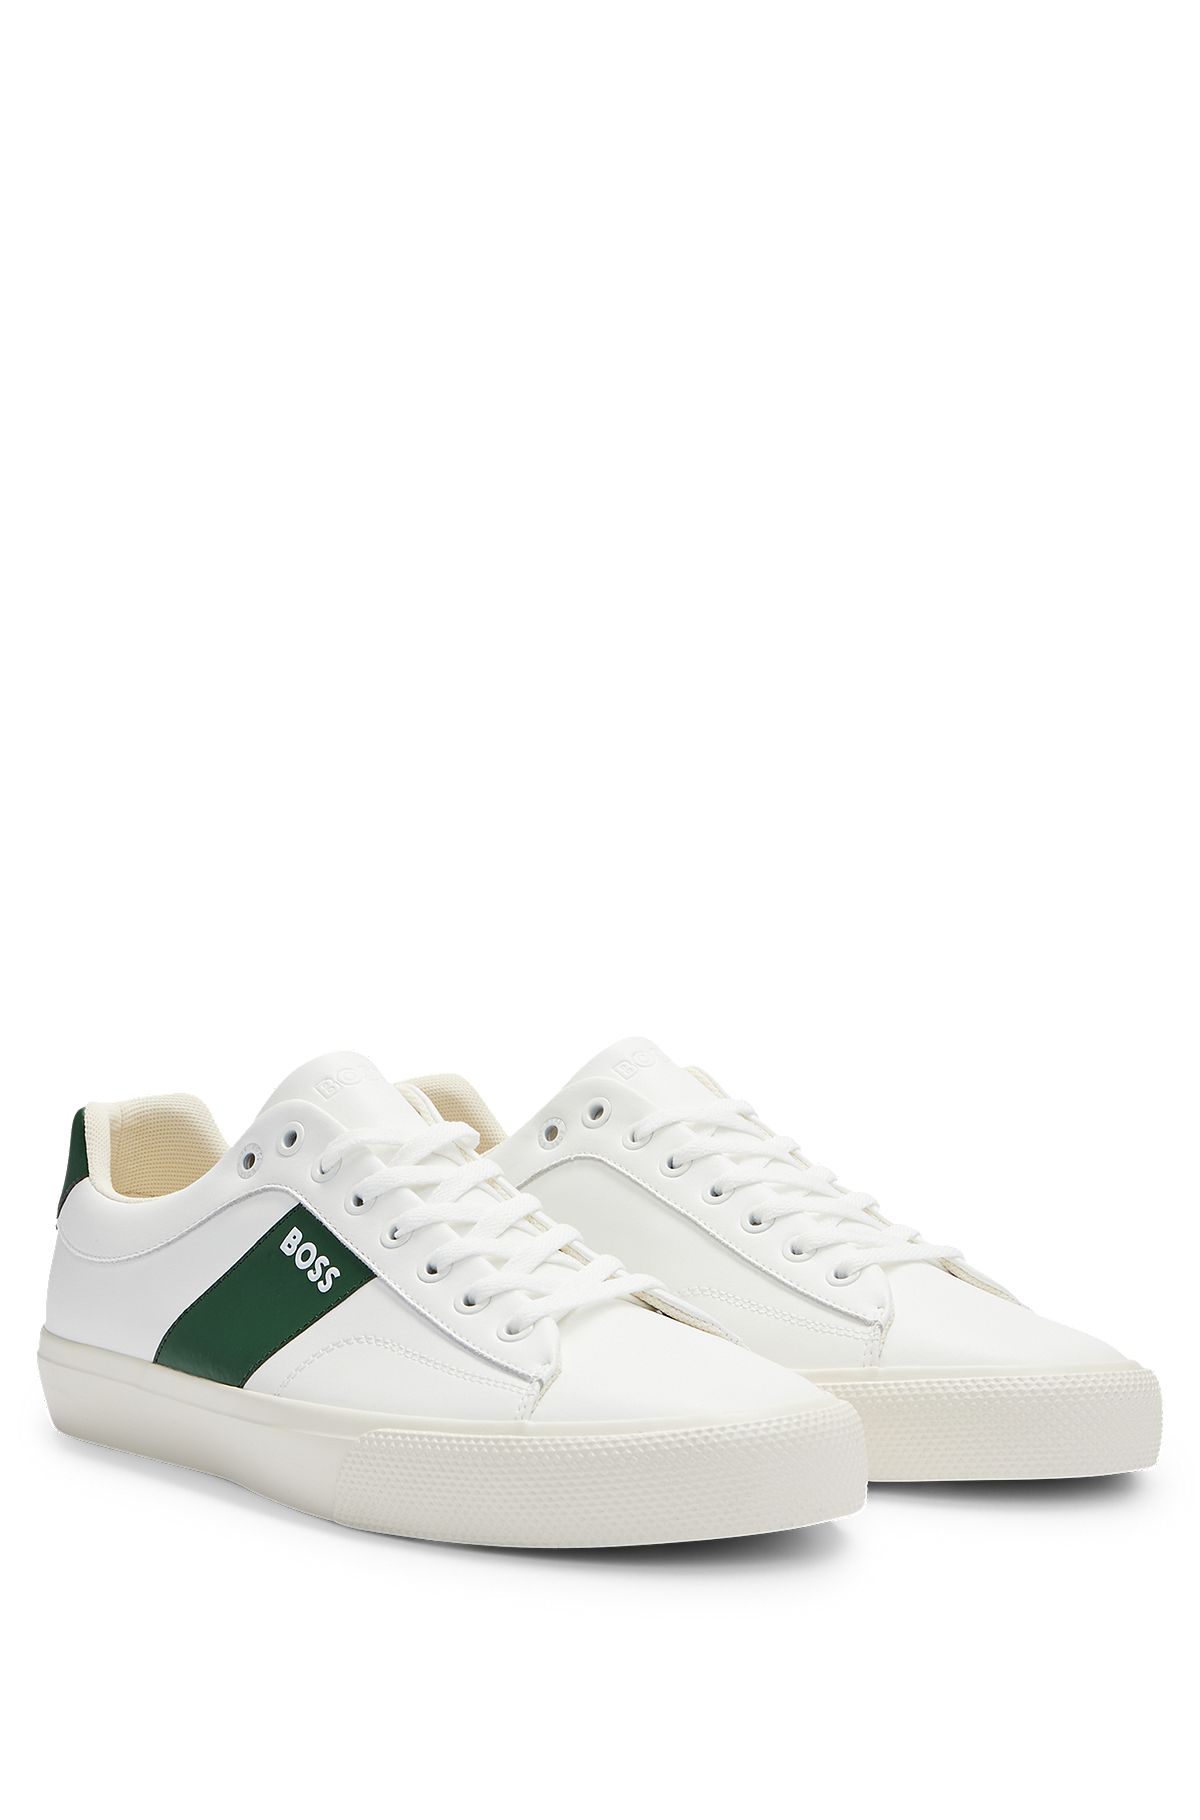 Cupsole trainers with contrast band, White